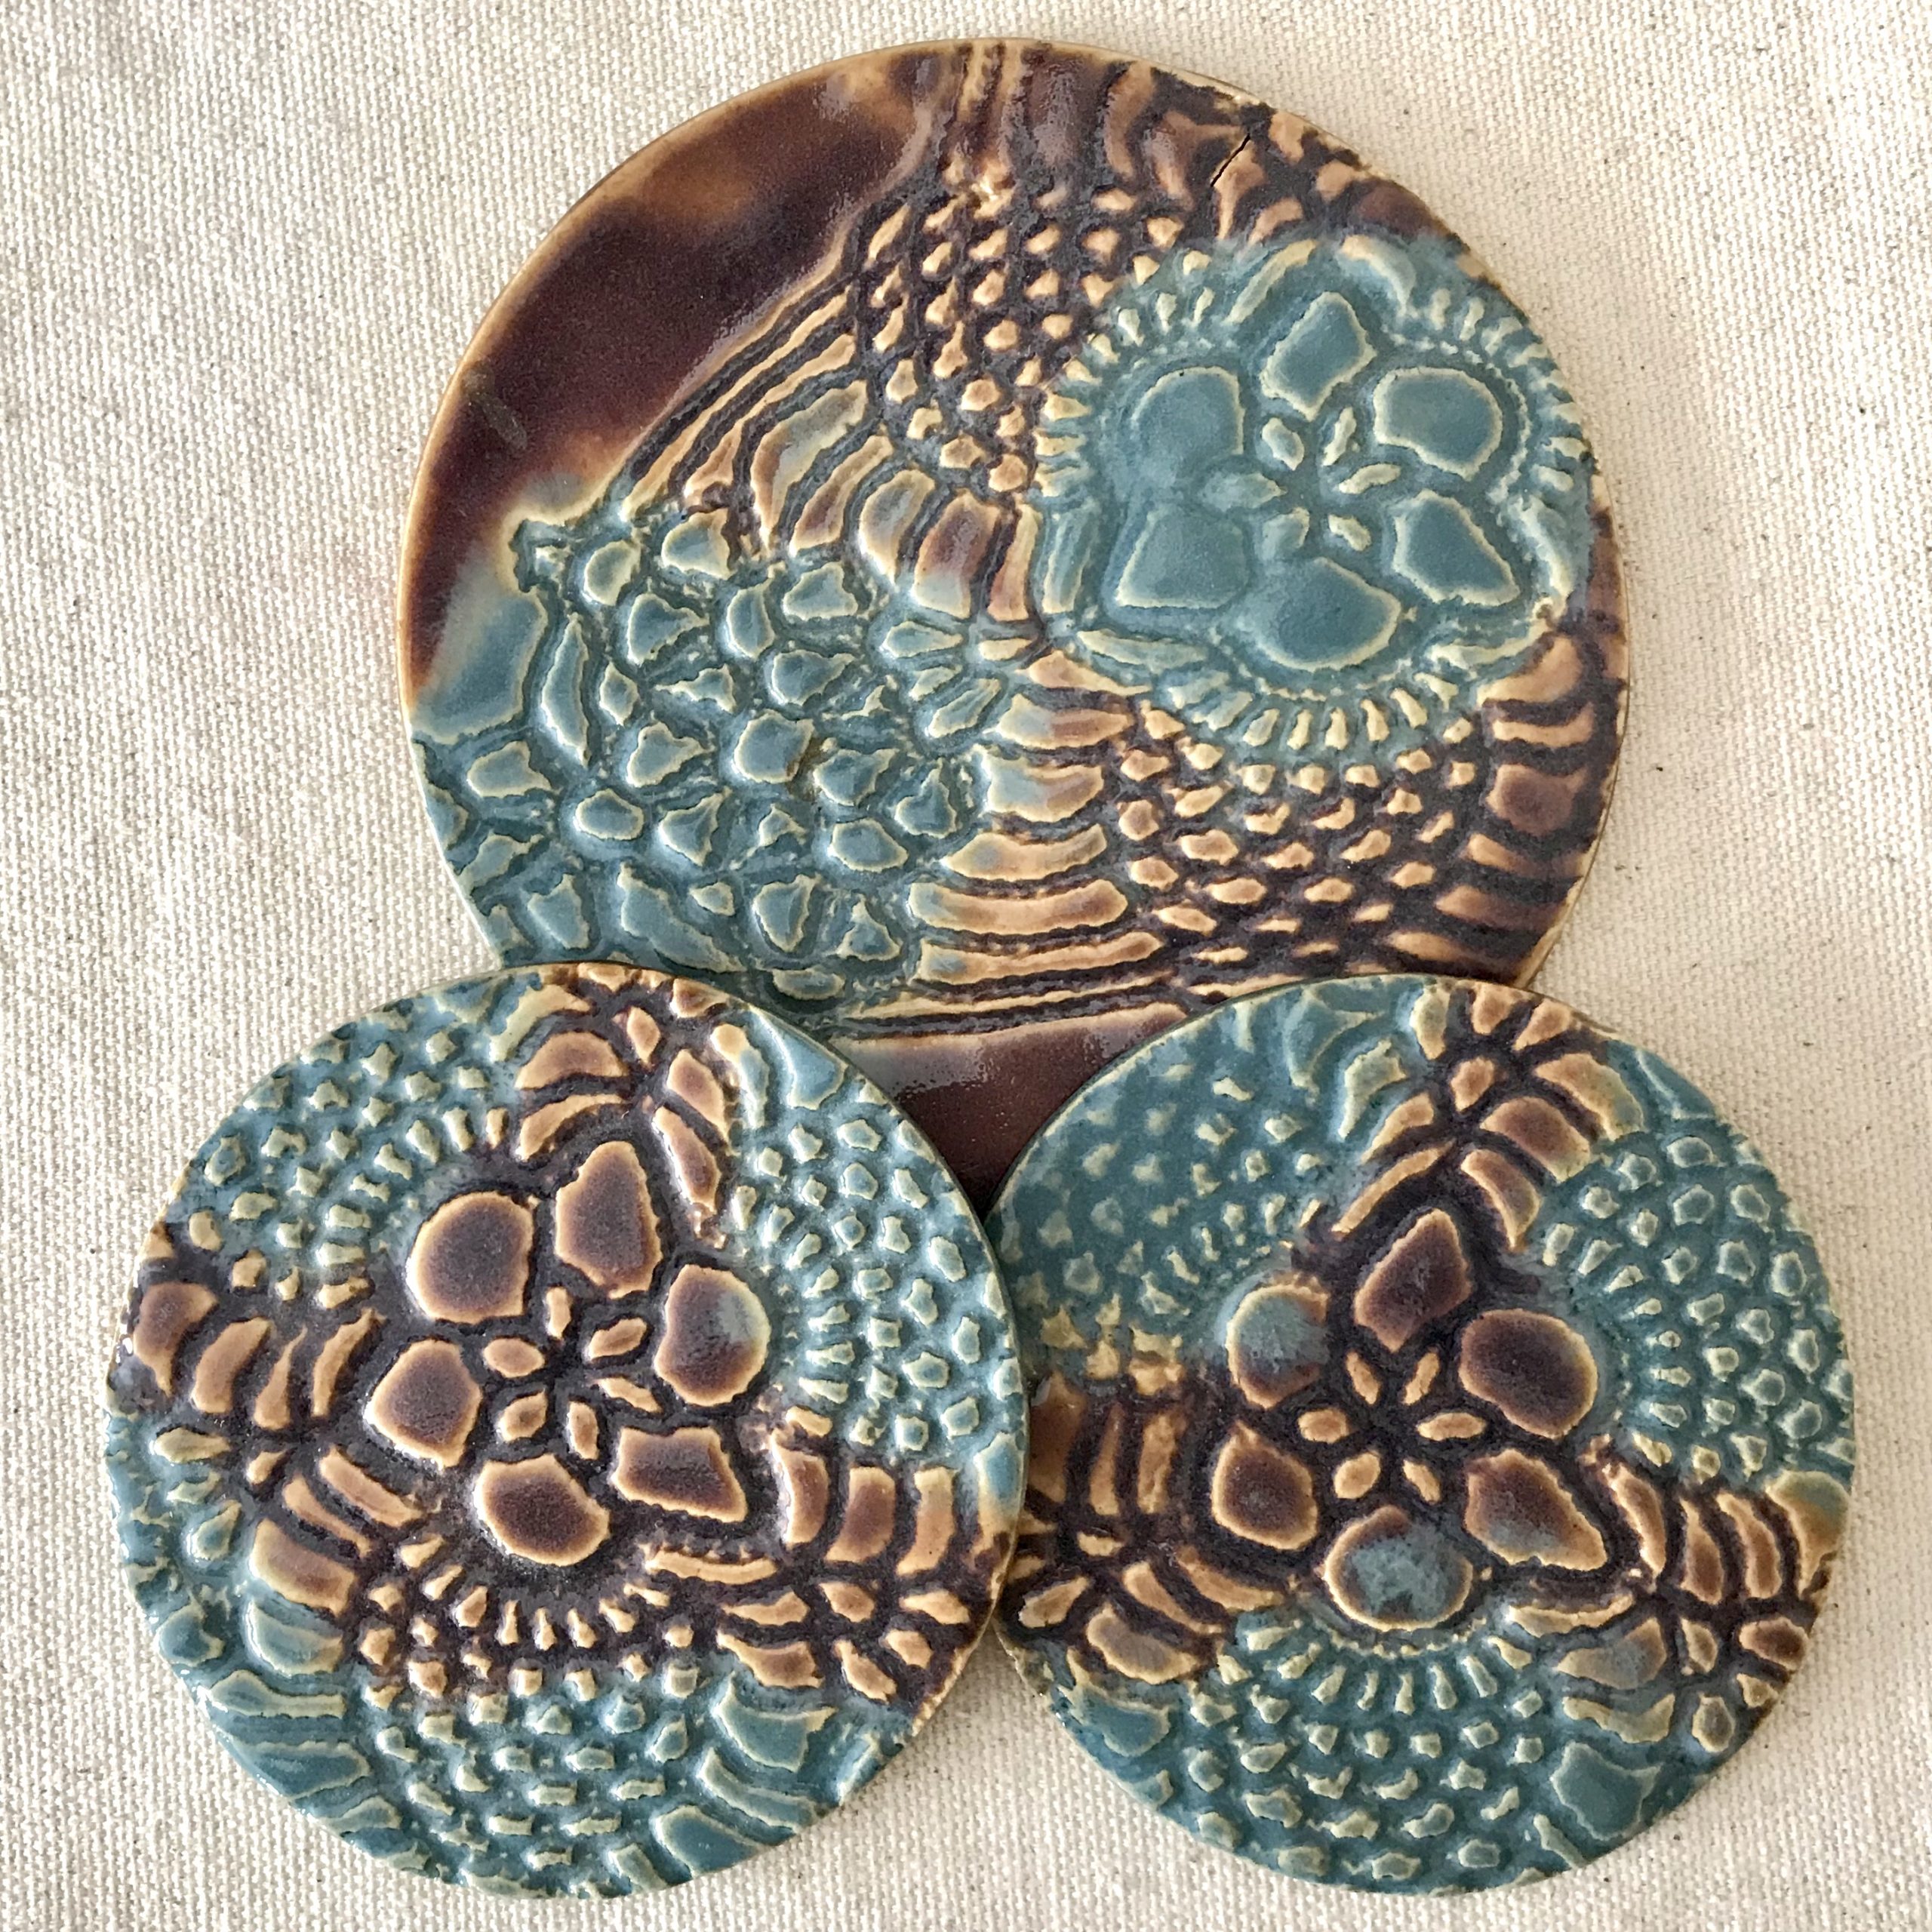 Coaster/Trivets - Brown and Blue Lace